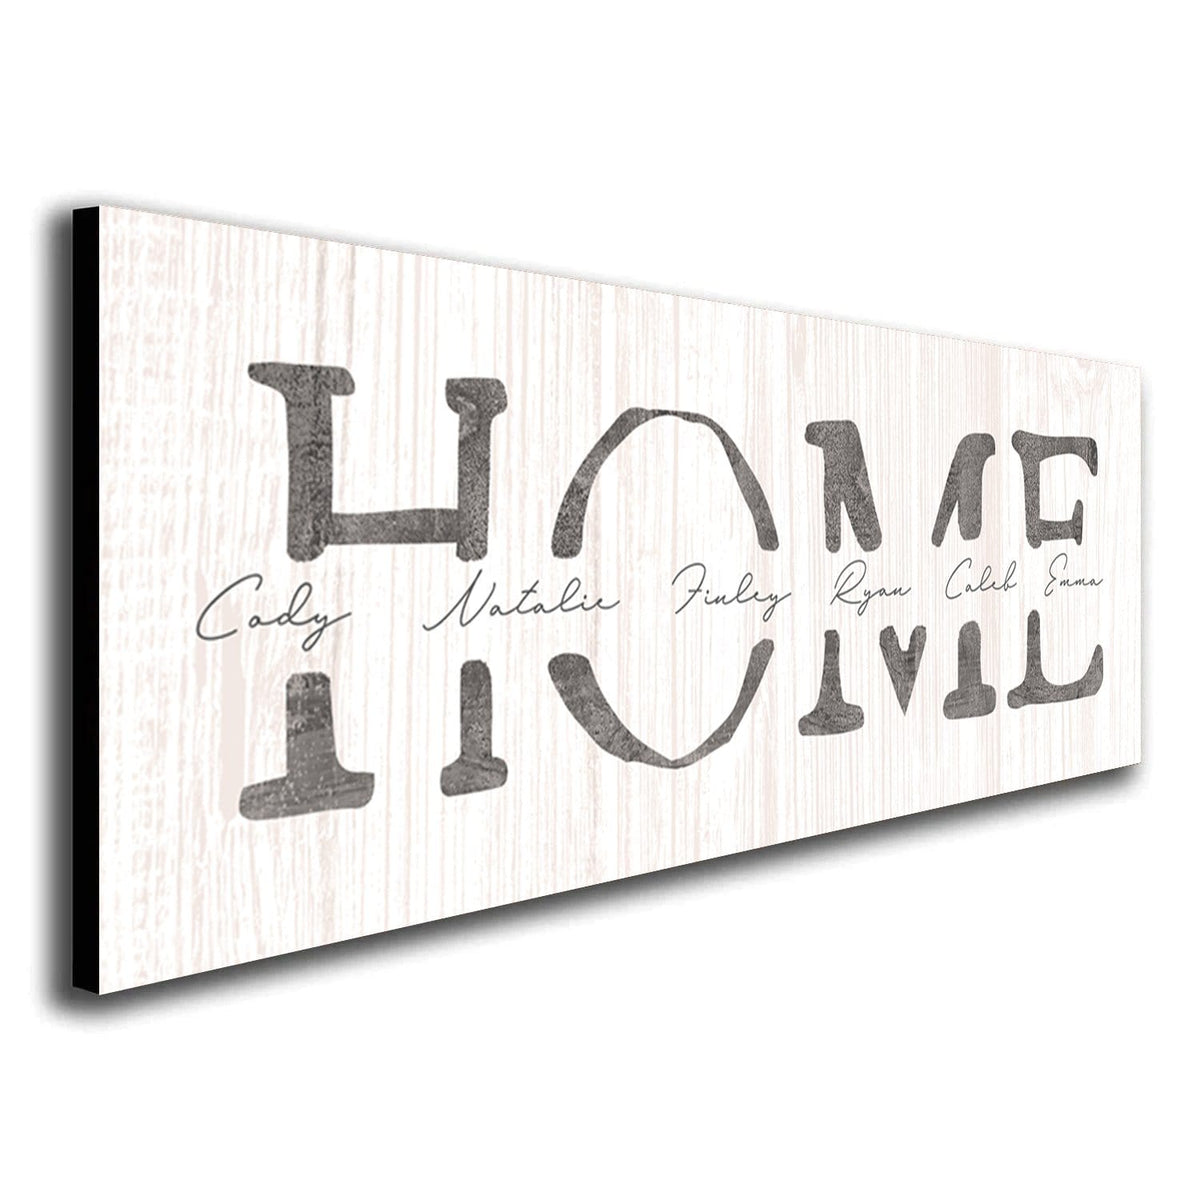 Personalized Wall Art Sign for home from Personal Prints